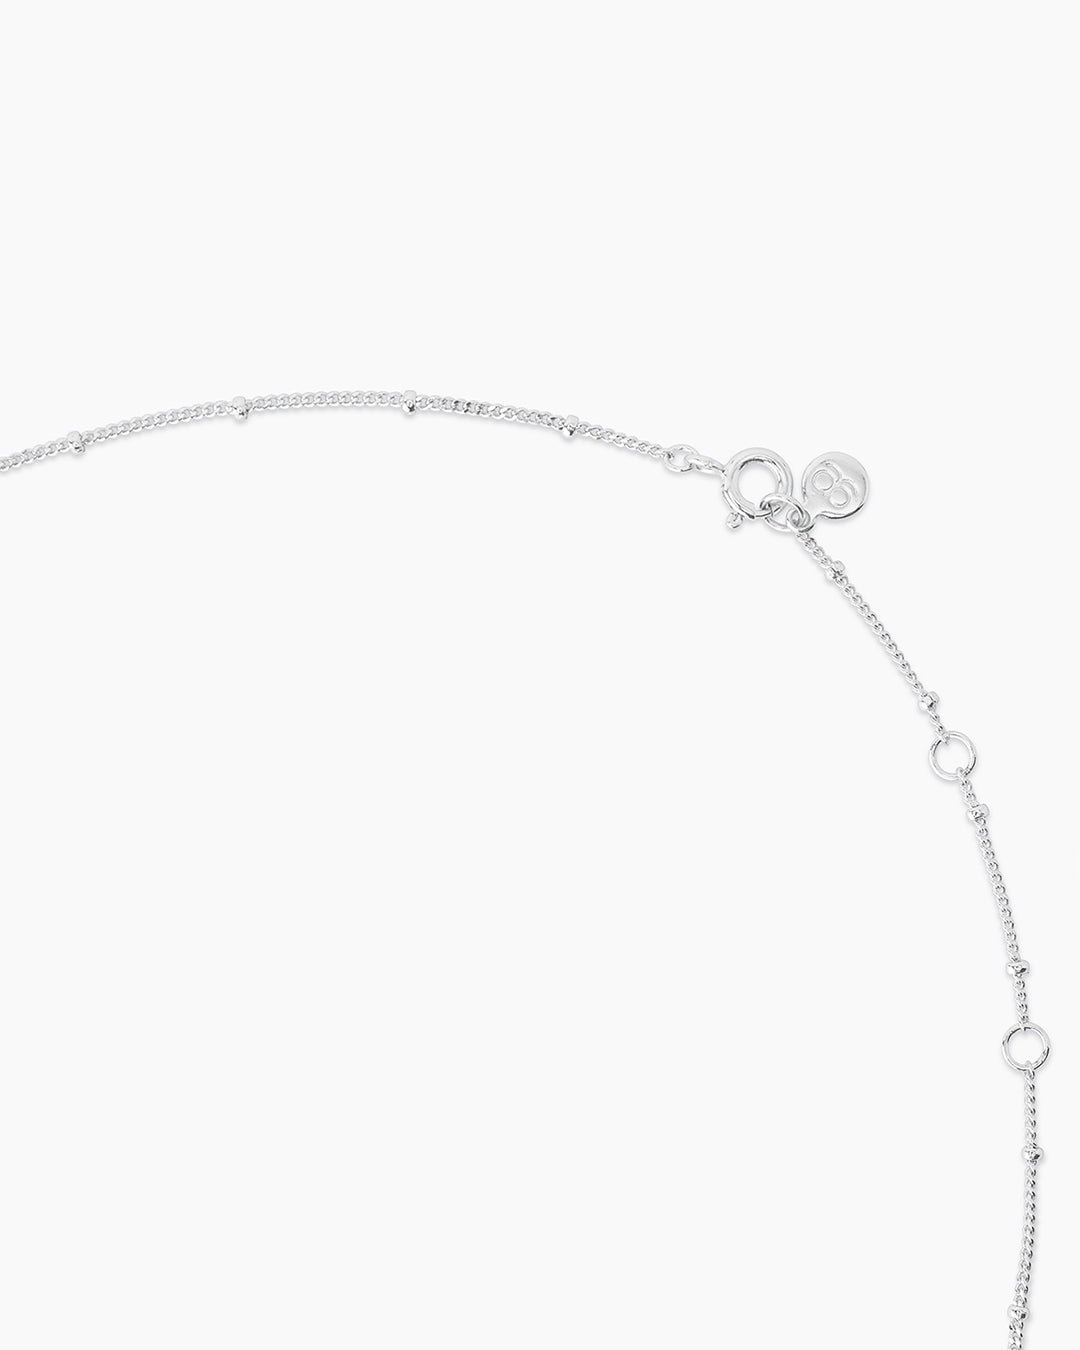   Silver Plated Coin Necklace, Compass Necklace || option::Silver Plated